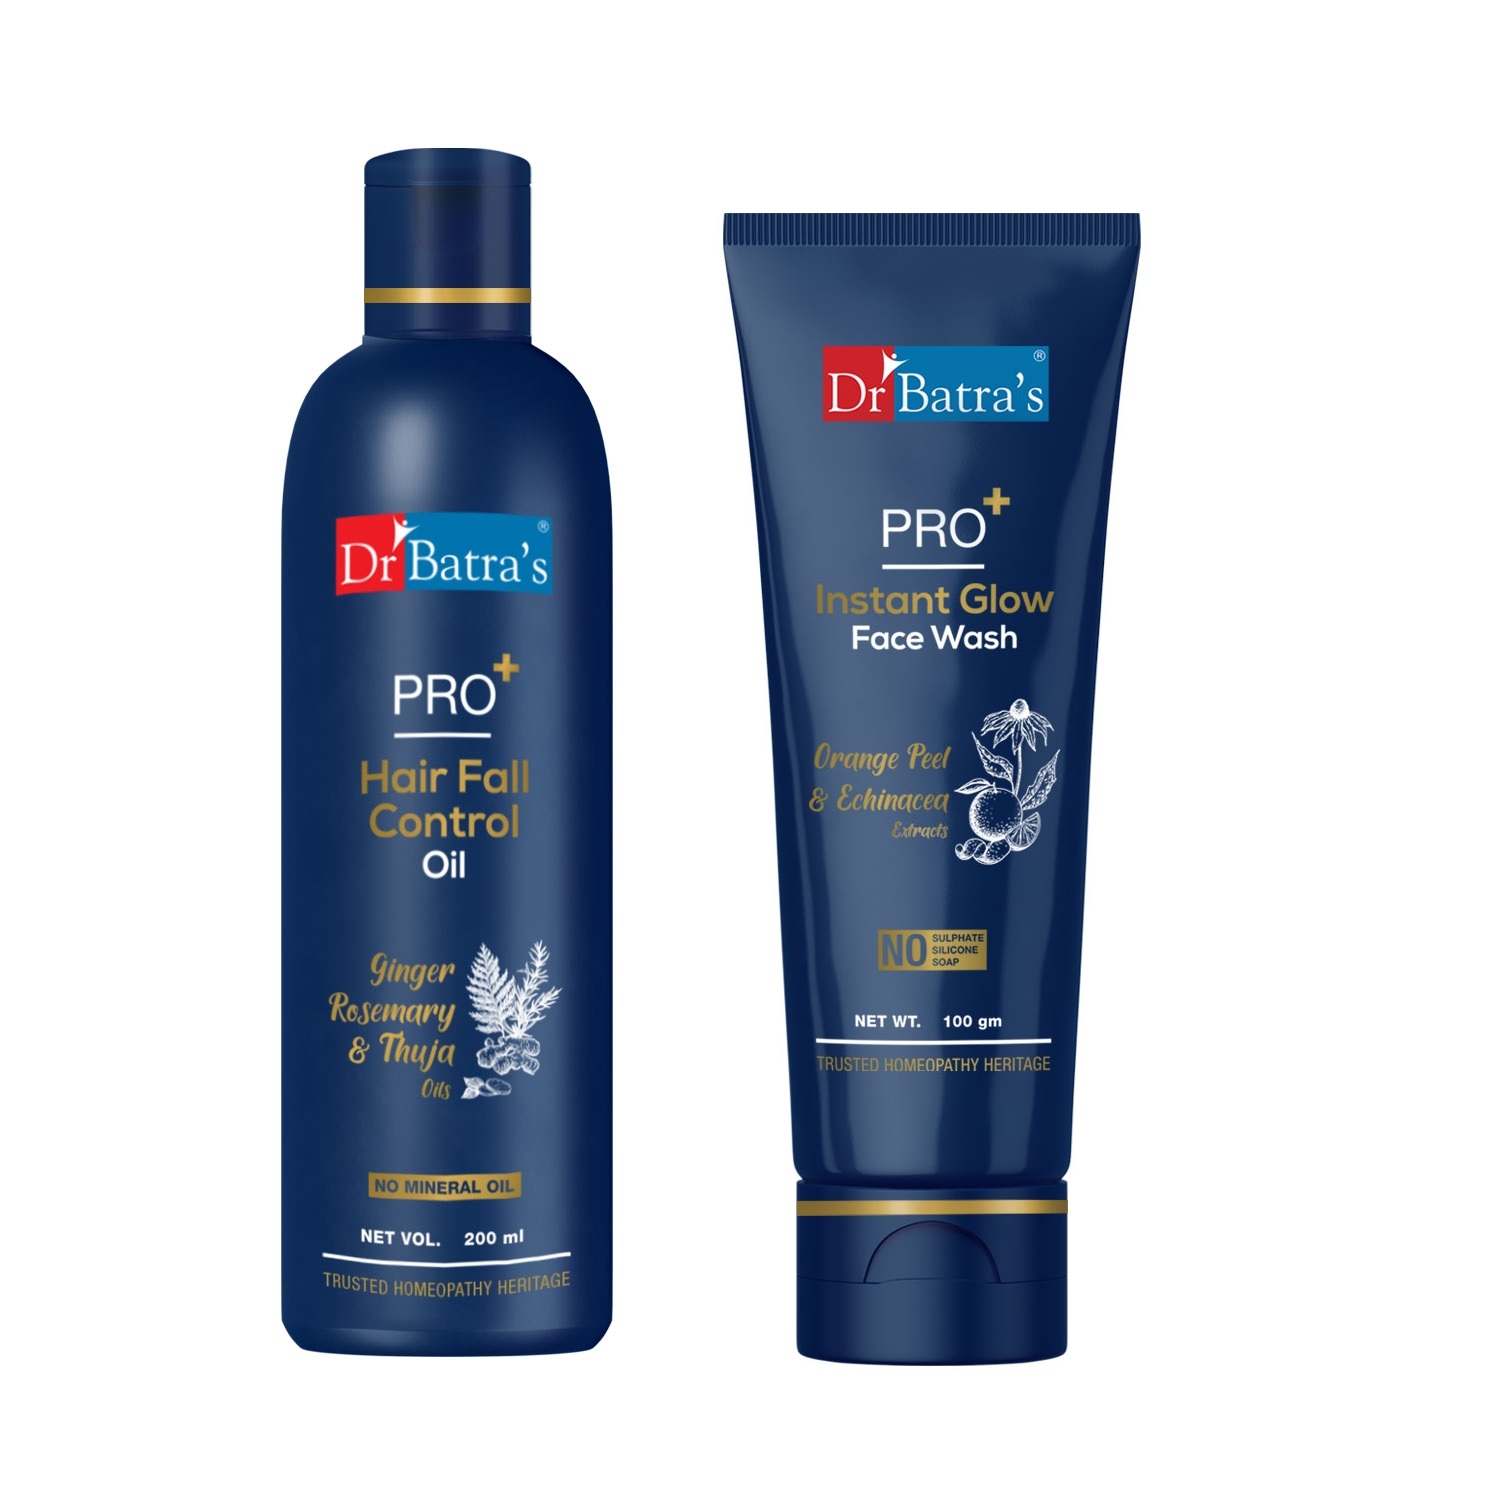 Dr Batra's | Dr Batra's PRO+ Hair Fall Control Oil -200ml and PRO+Instant Glow Face Wash-100 g 0